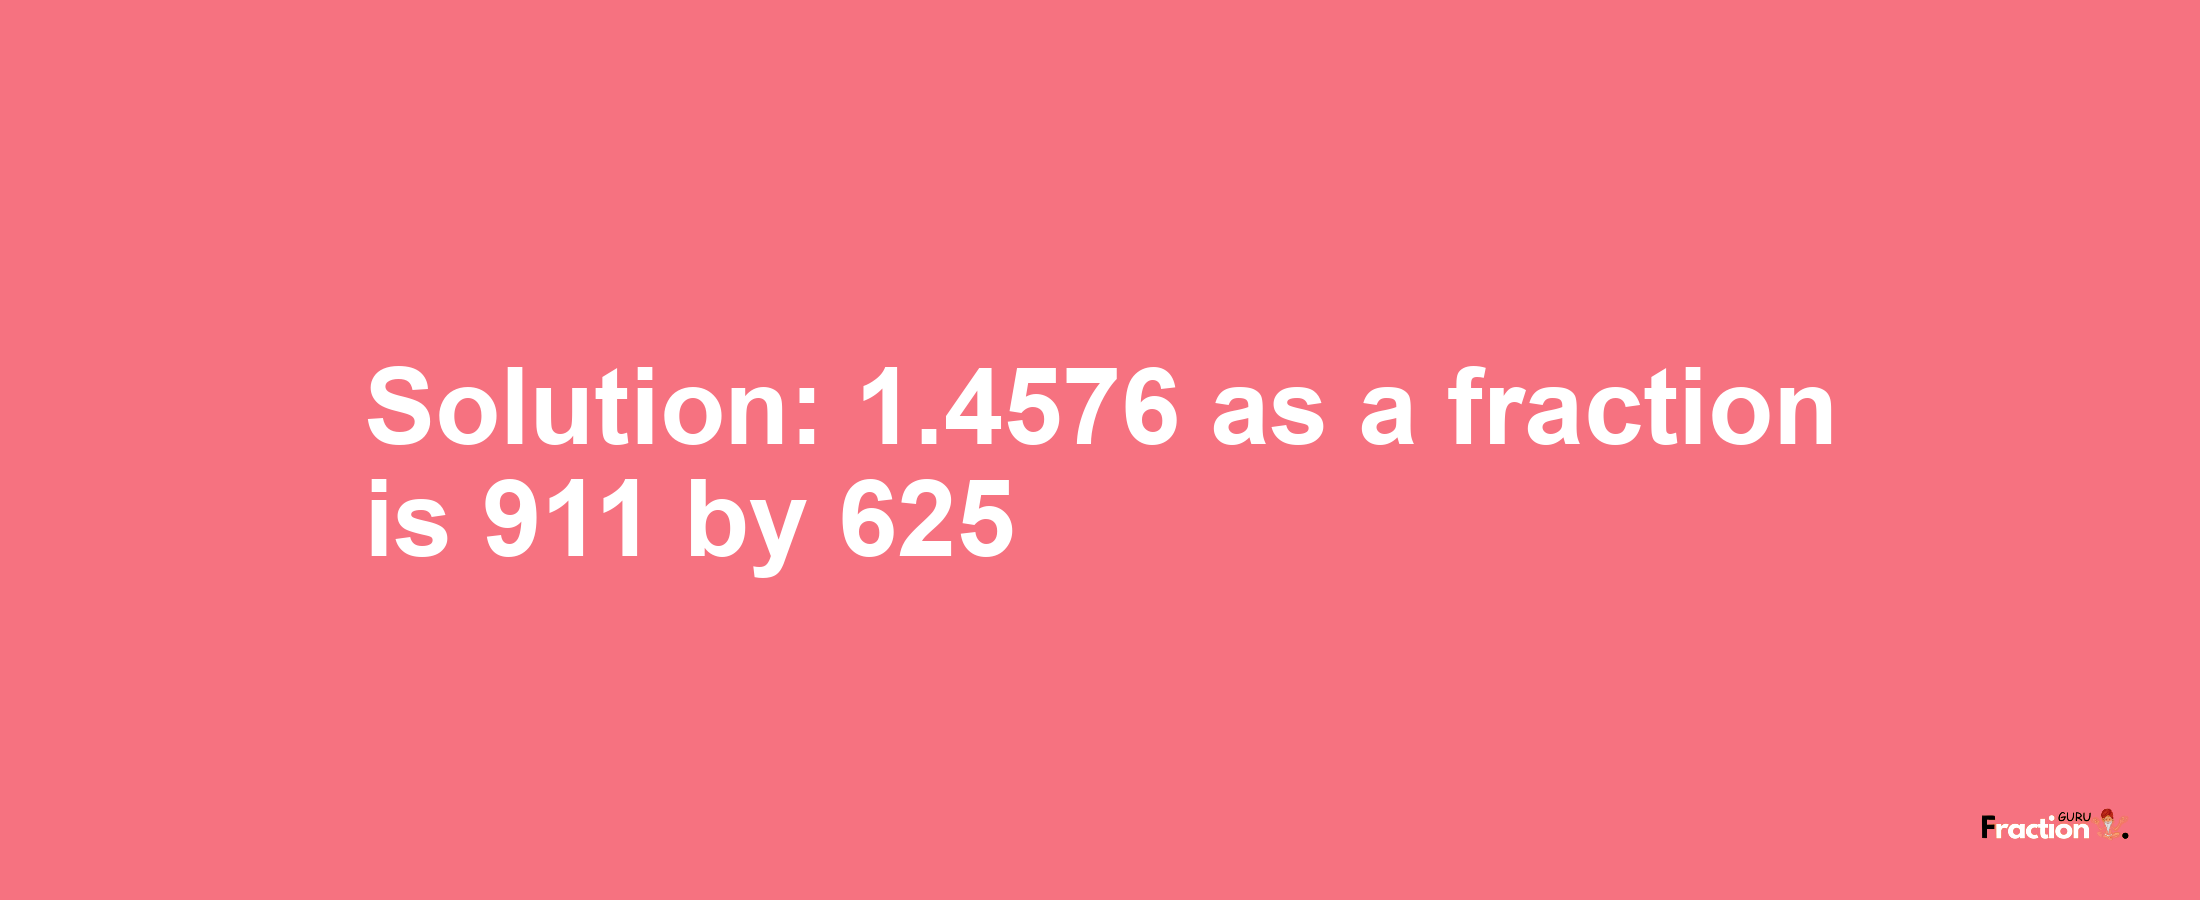 Solution:1.4576 as a fraction is 911/625